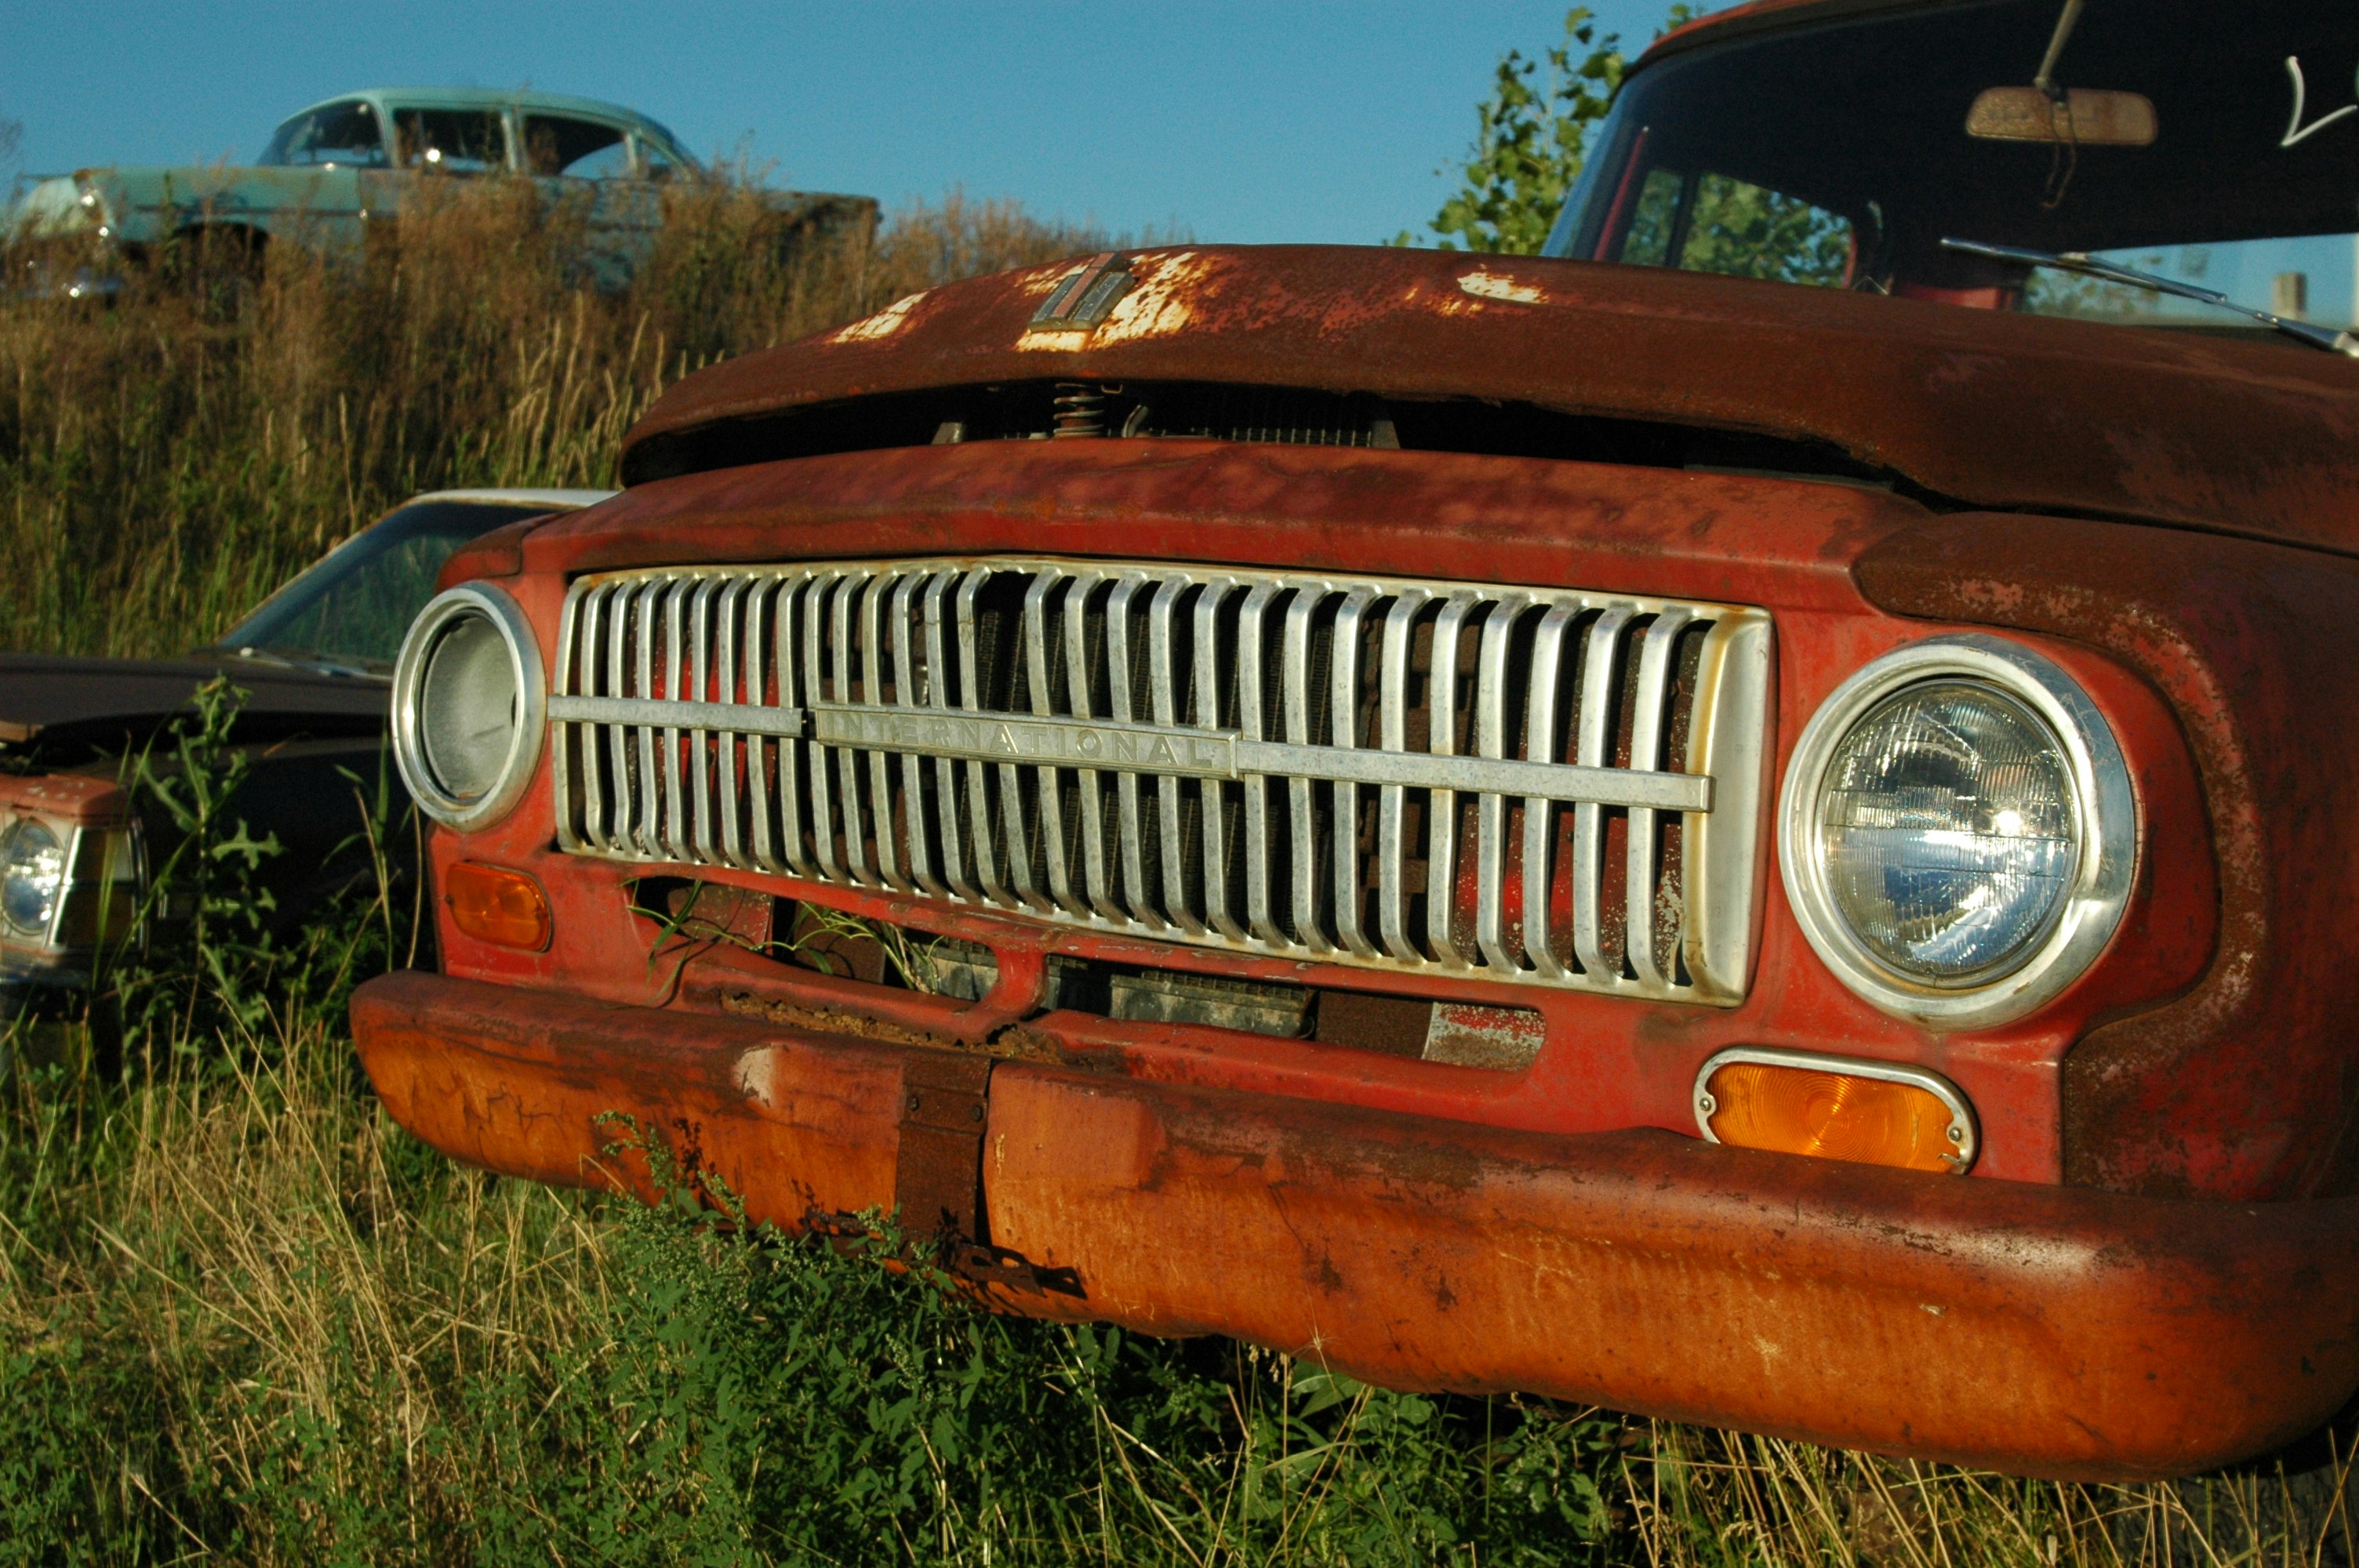 Red, rusty vintage Ford pickup truck with chrome grill and headlights sits abandoned in a rural junkyard in Wisconsin, among many other automobiles put out to pasture after their time on the road. This images was taken during golden hour and I love the color of the light and the way it really highlights the age of this dilapidated truck.